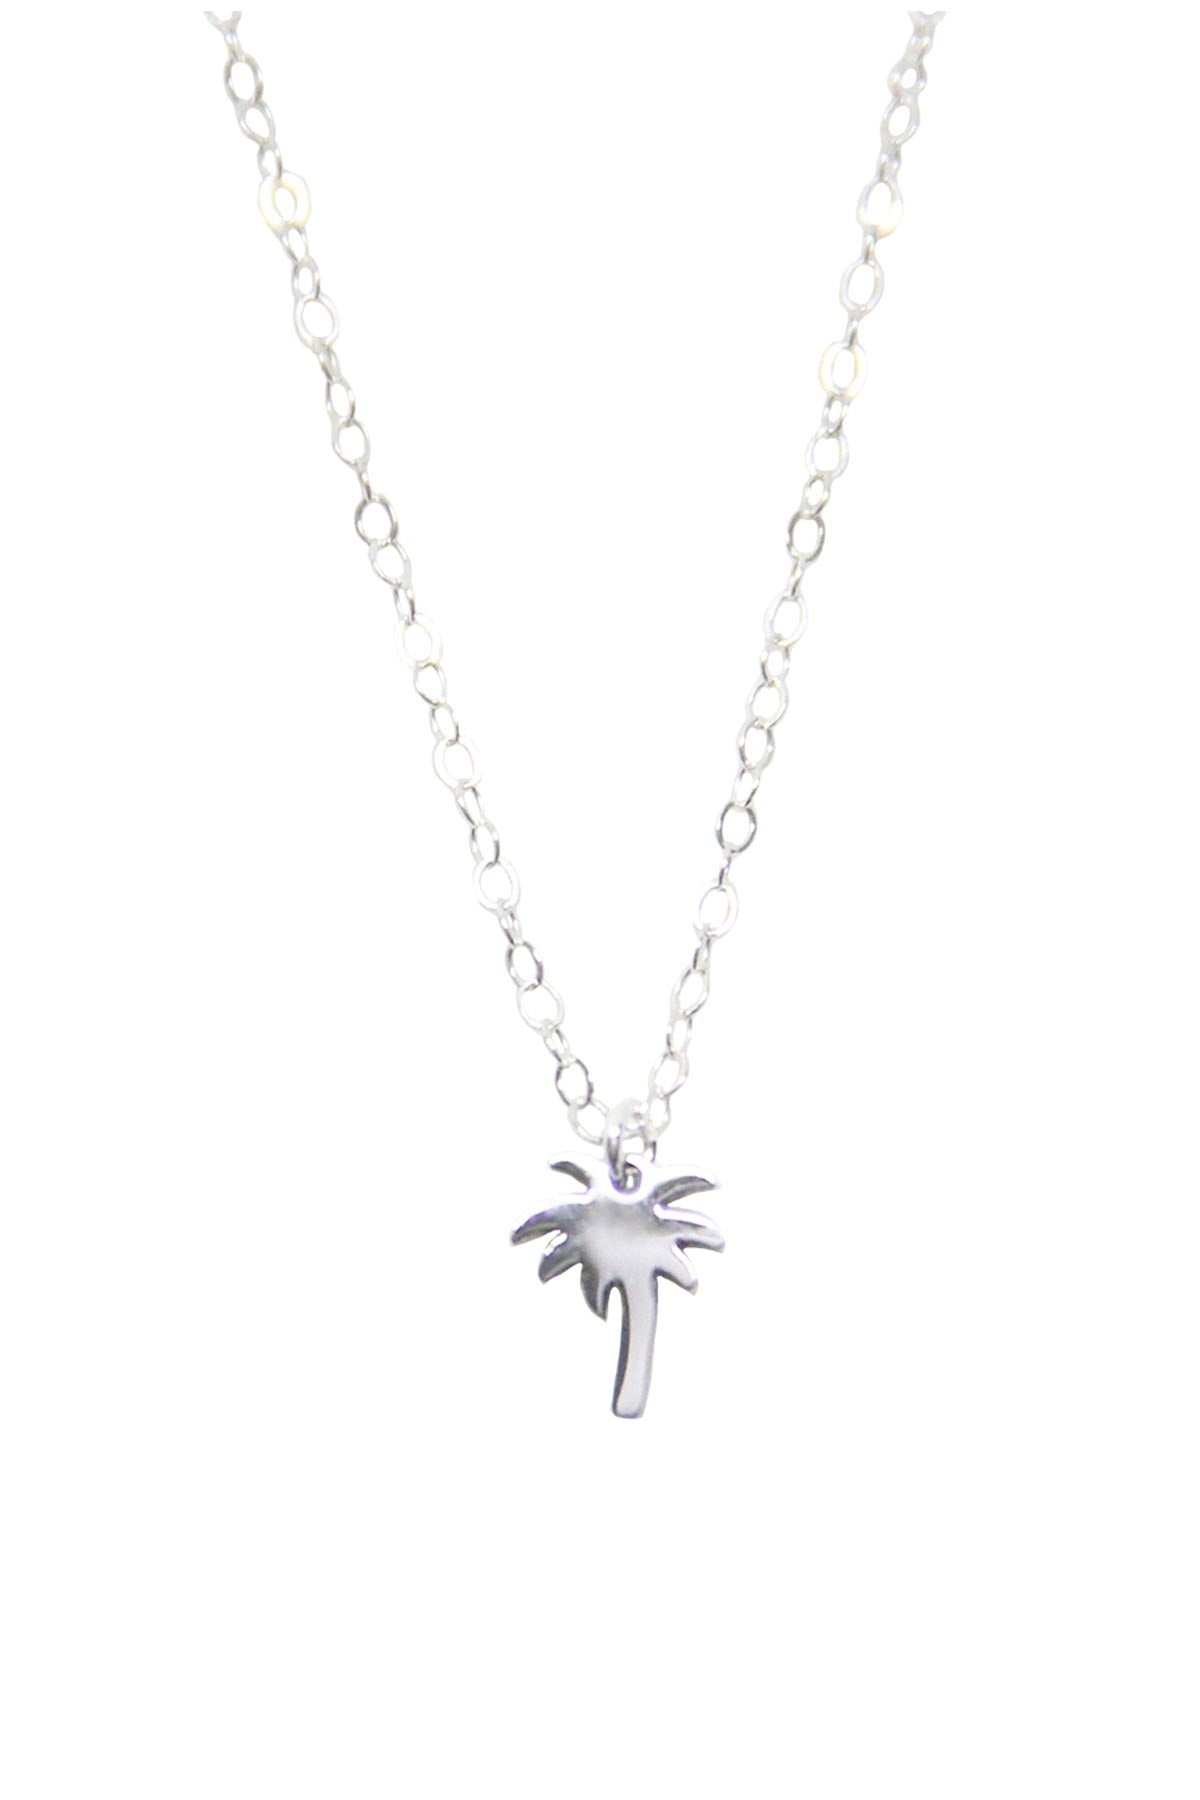   PALM TREE NECKLACE by SEOUL LITTLE 